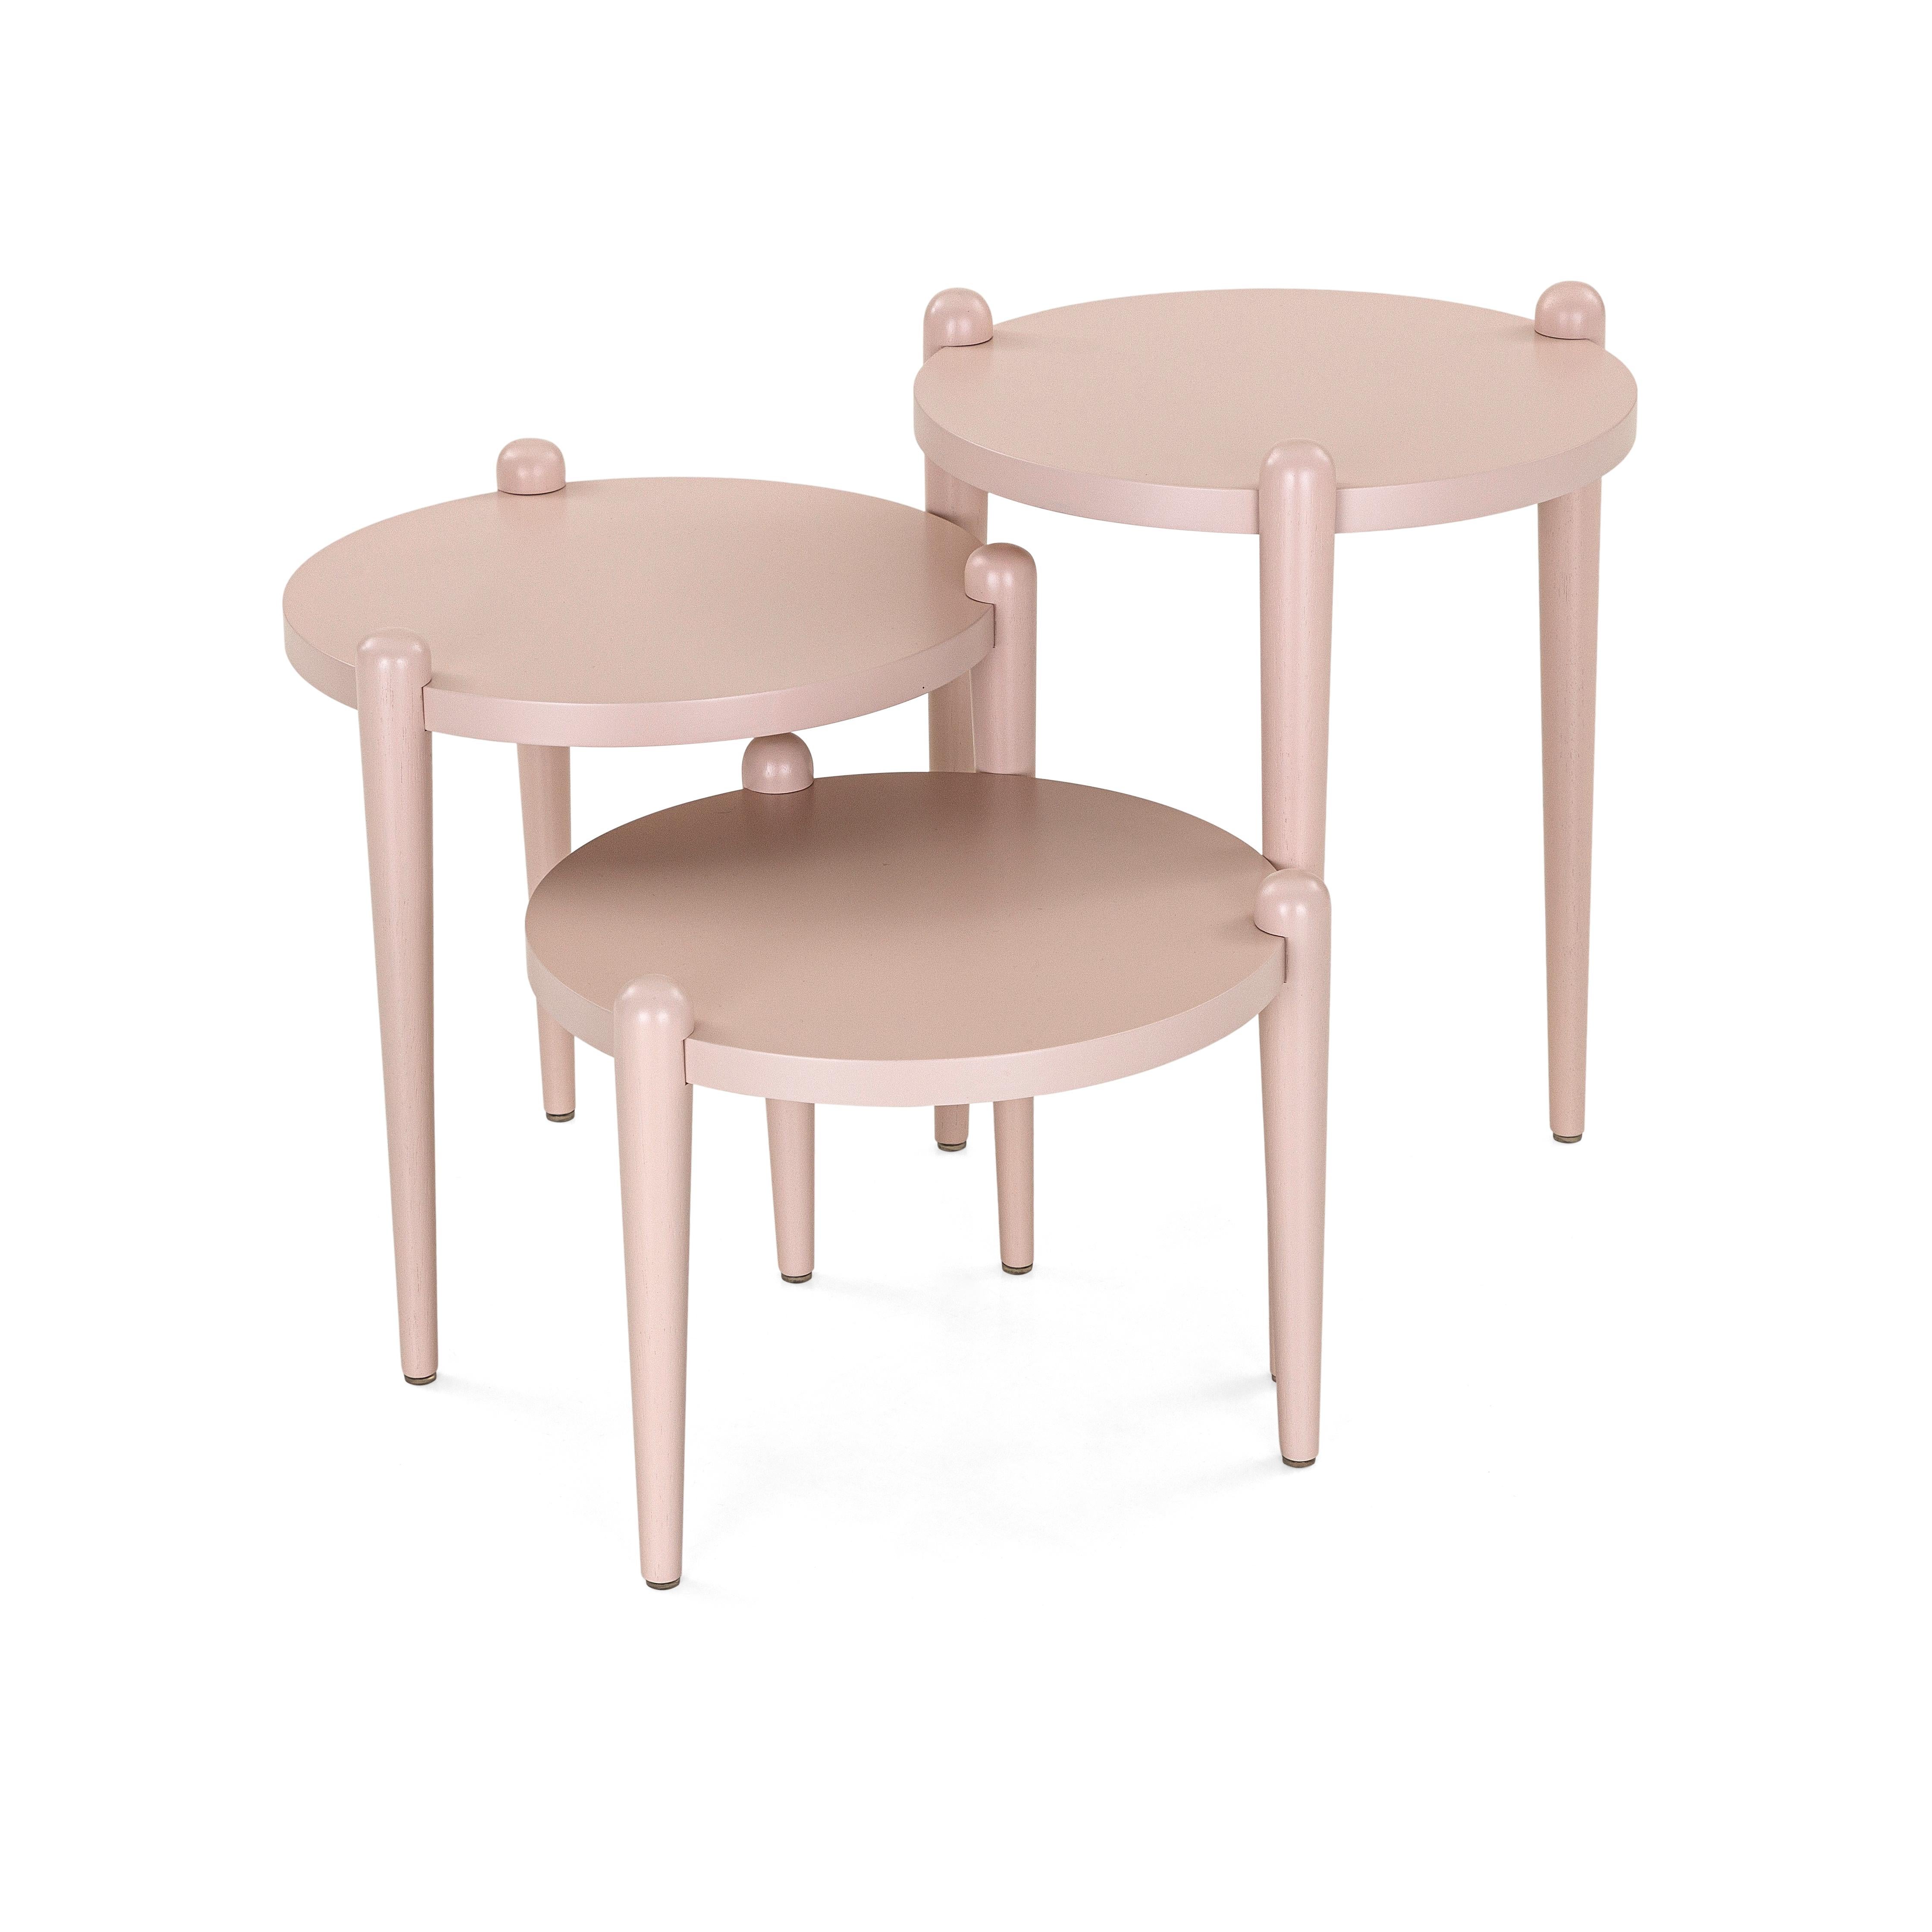 Hardwood Pan Contemporary Side Tables in Light Pink Quartz Finish, Set of 3 For Sale